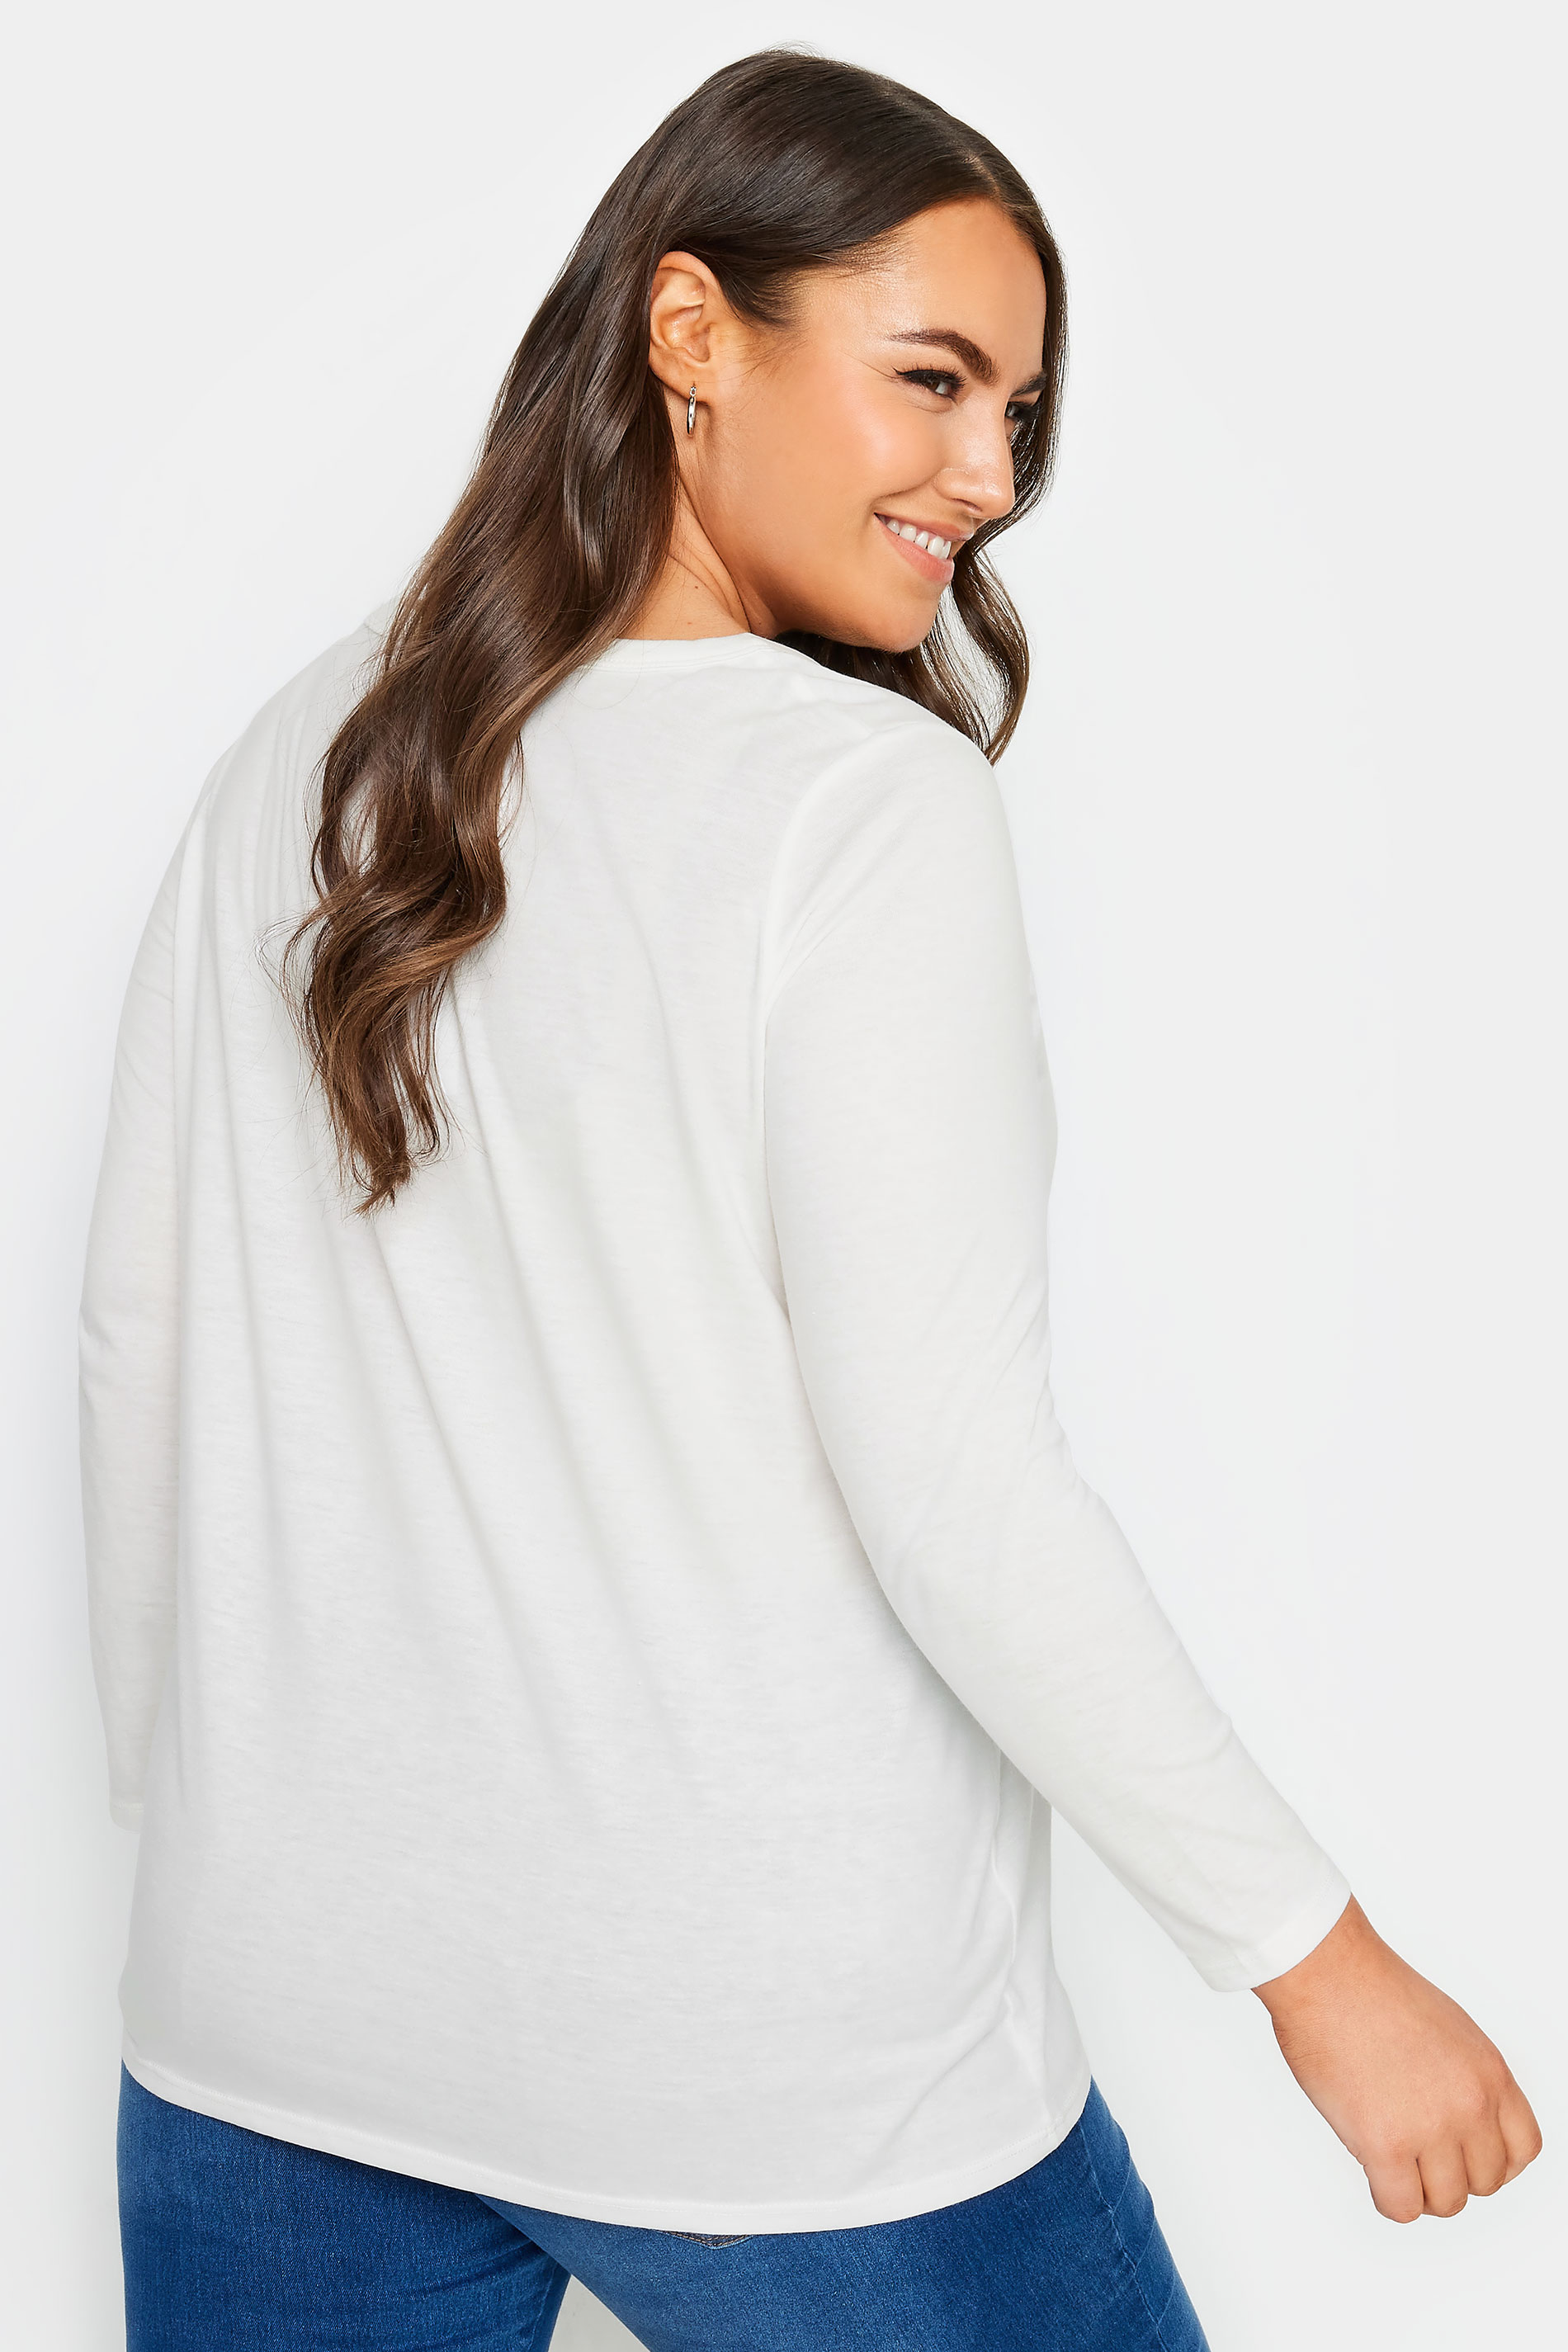 YOURS Plus Size White Long Sleeve Top | Yours Clothing 3